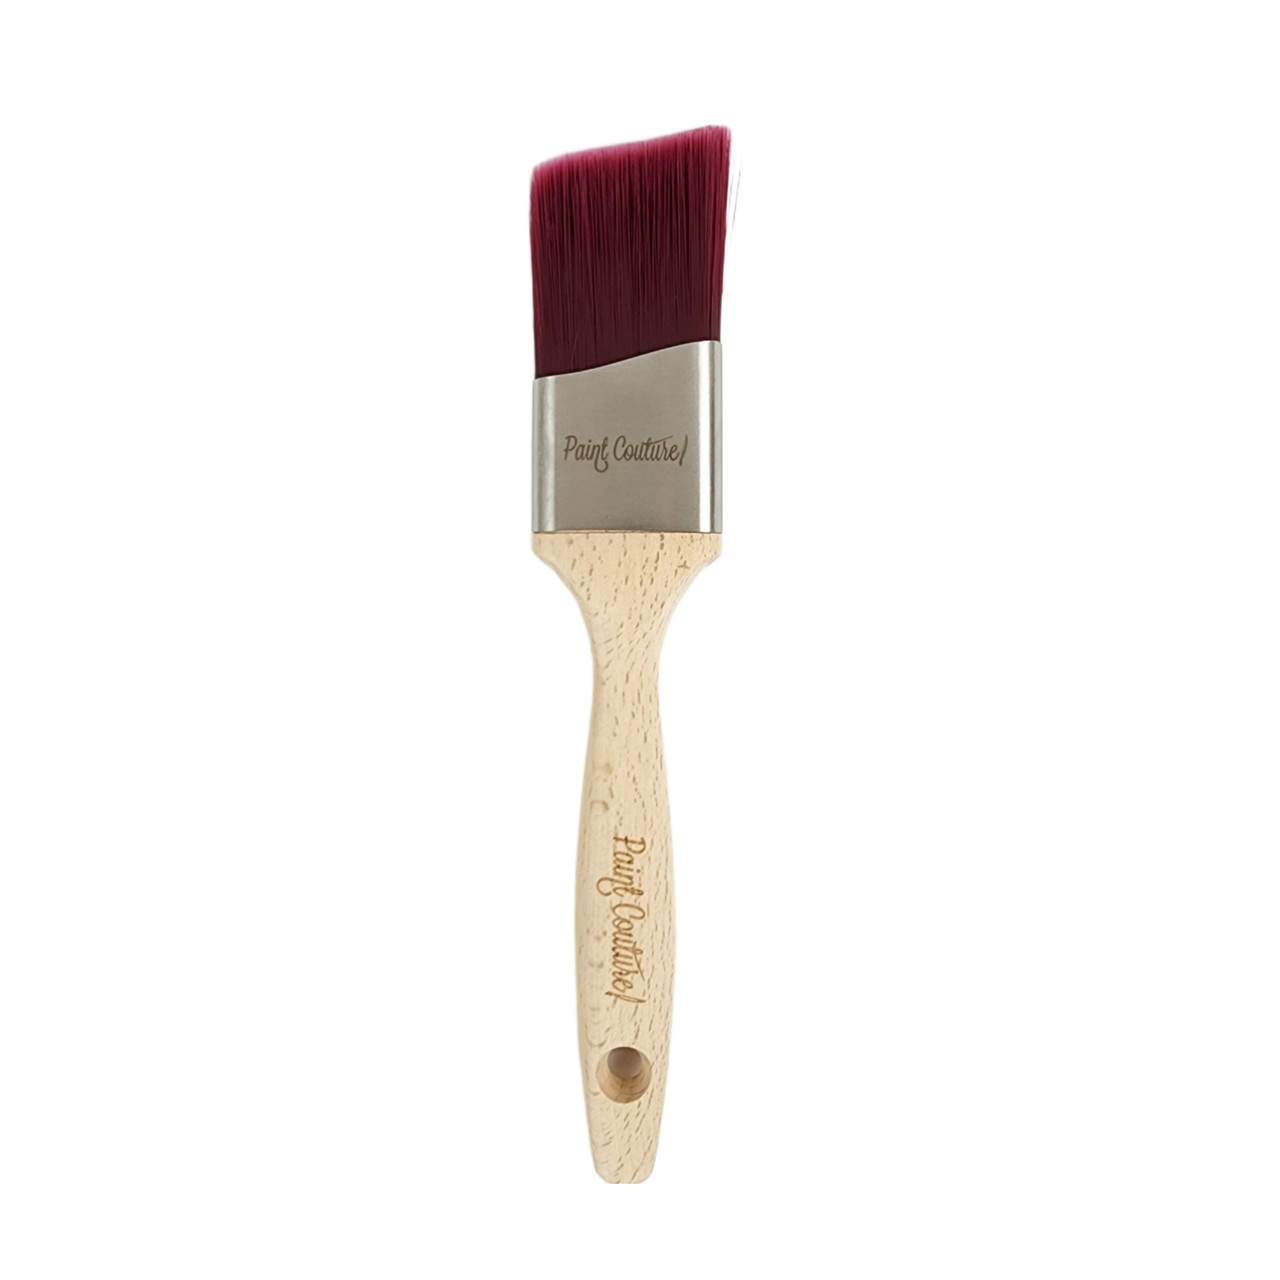 2 Angle Long Synthetic Paint Brush by Paint Couture